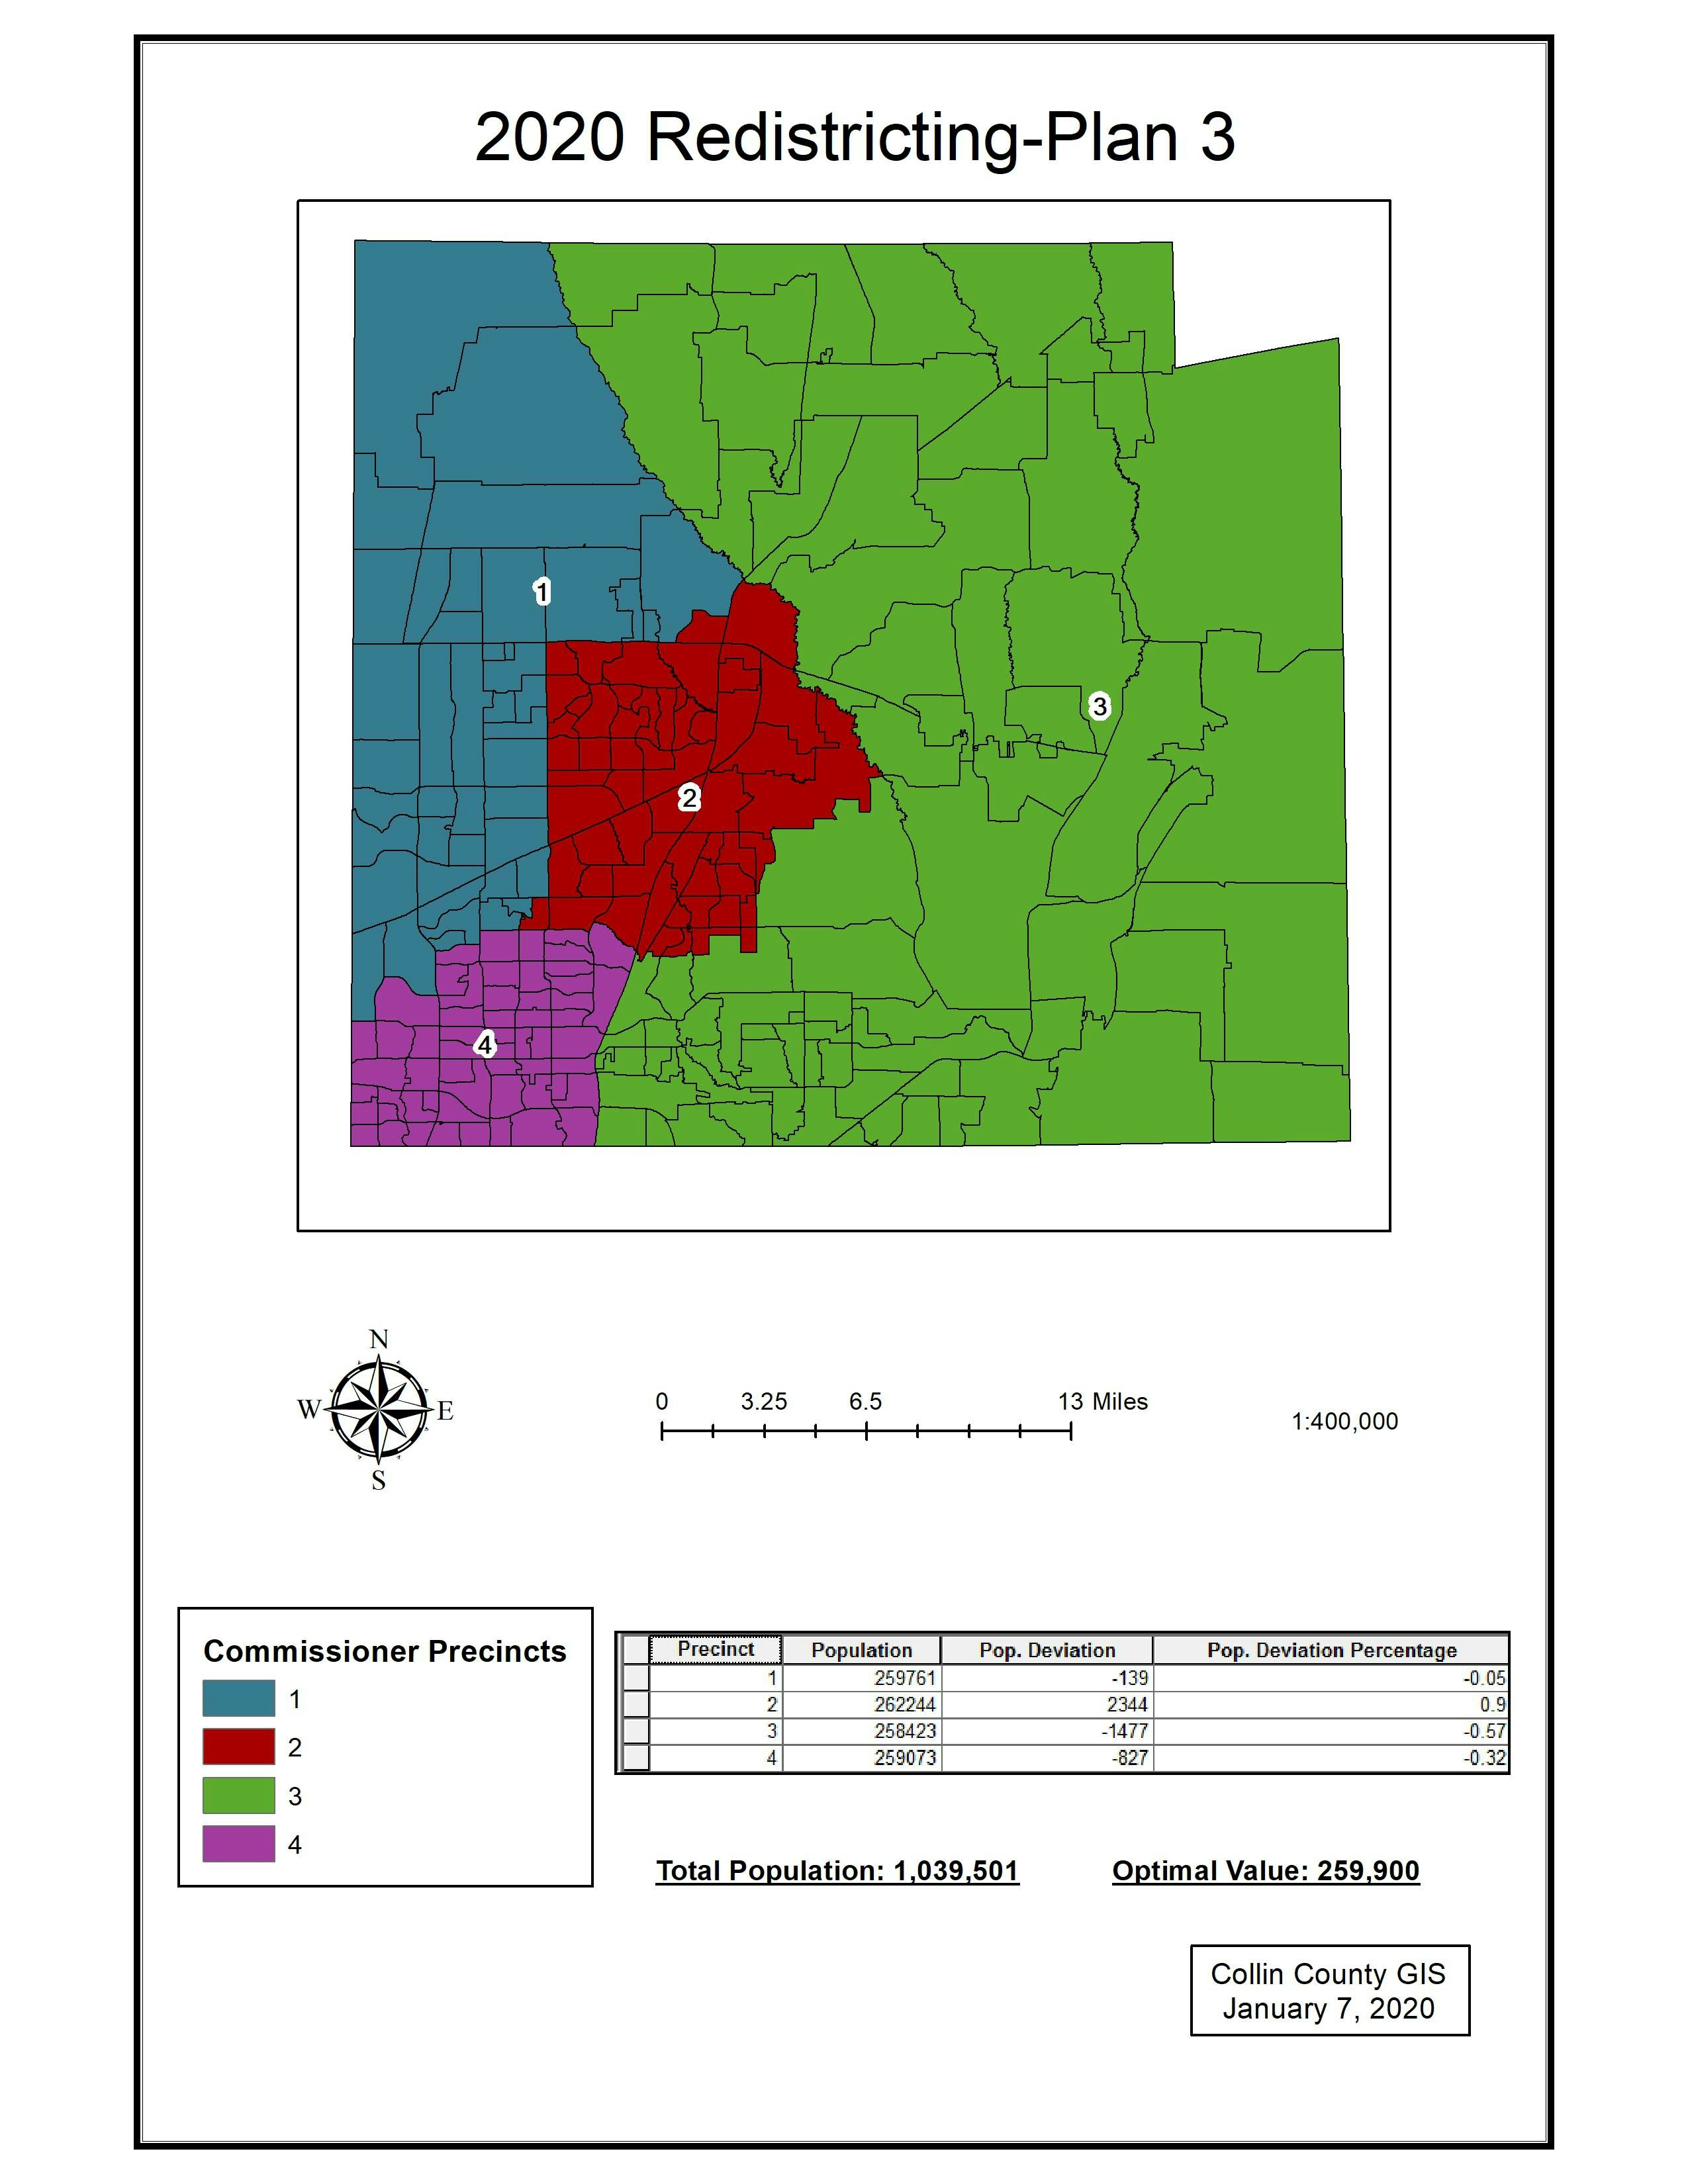 Redistricting Plan 3-Collin County